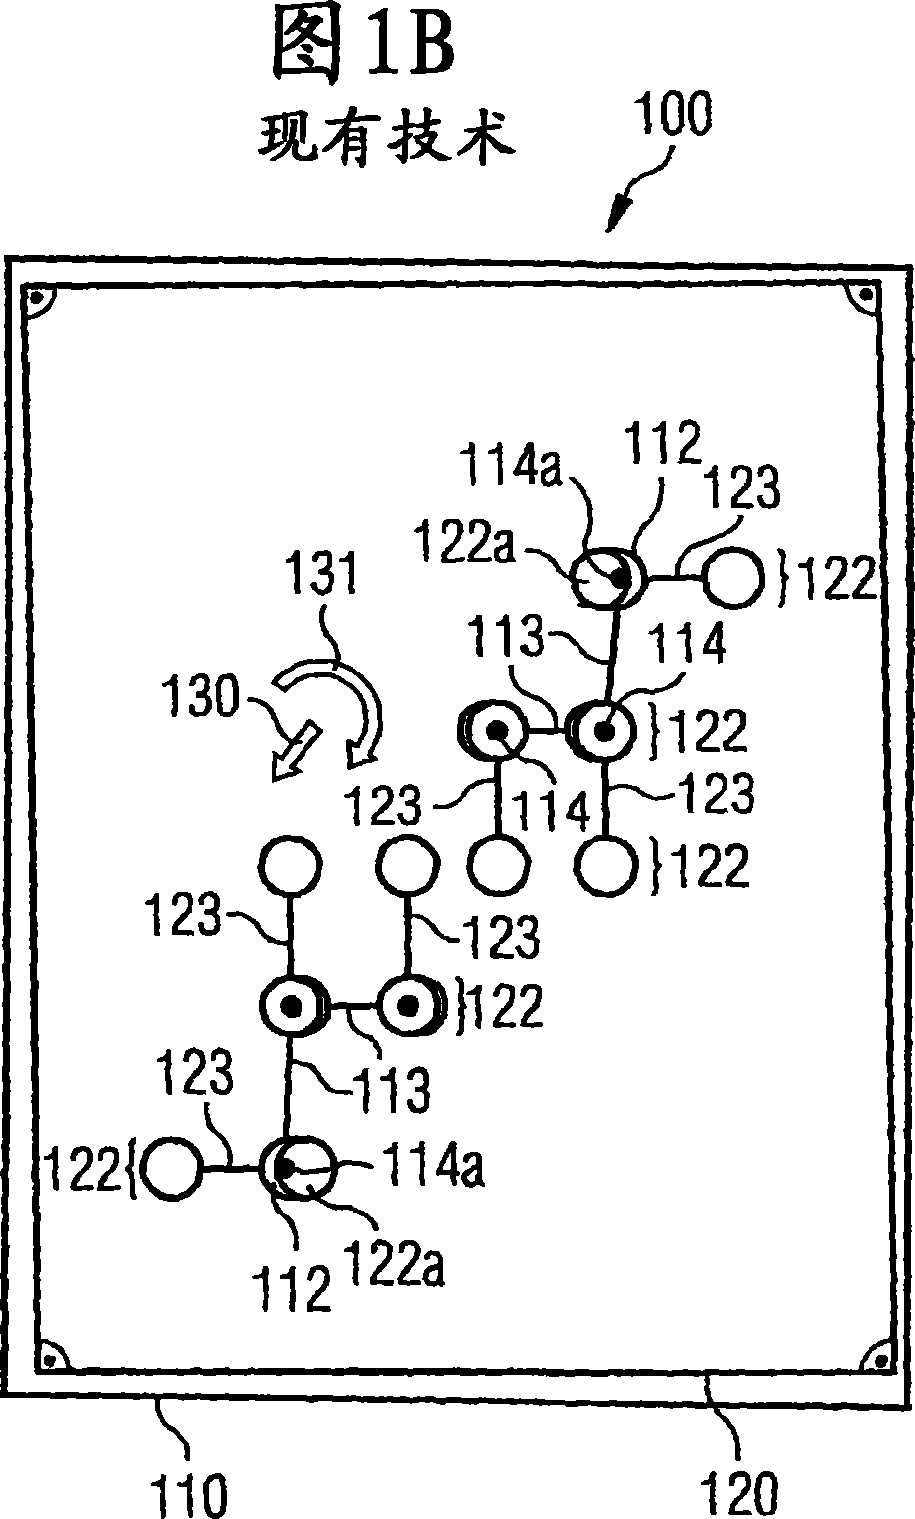 Method for producing substrates